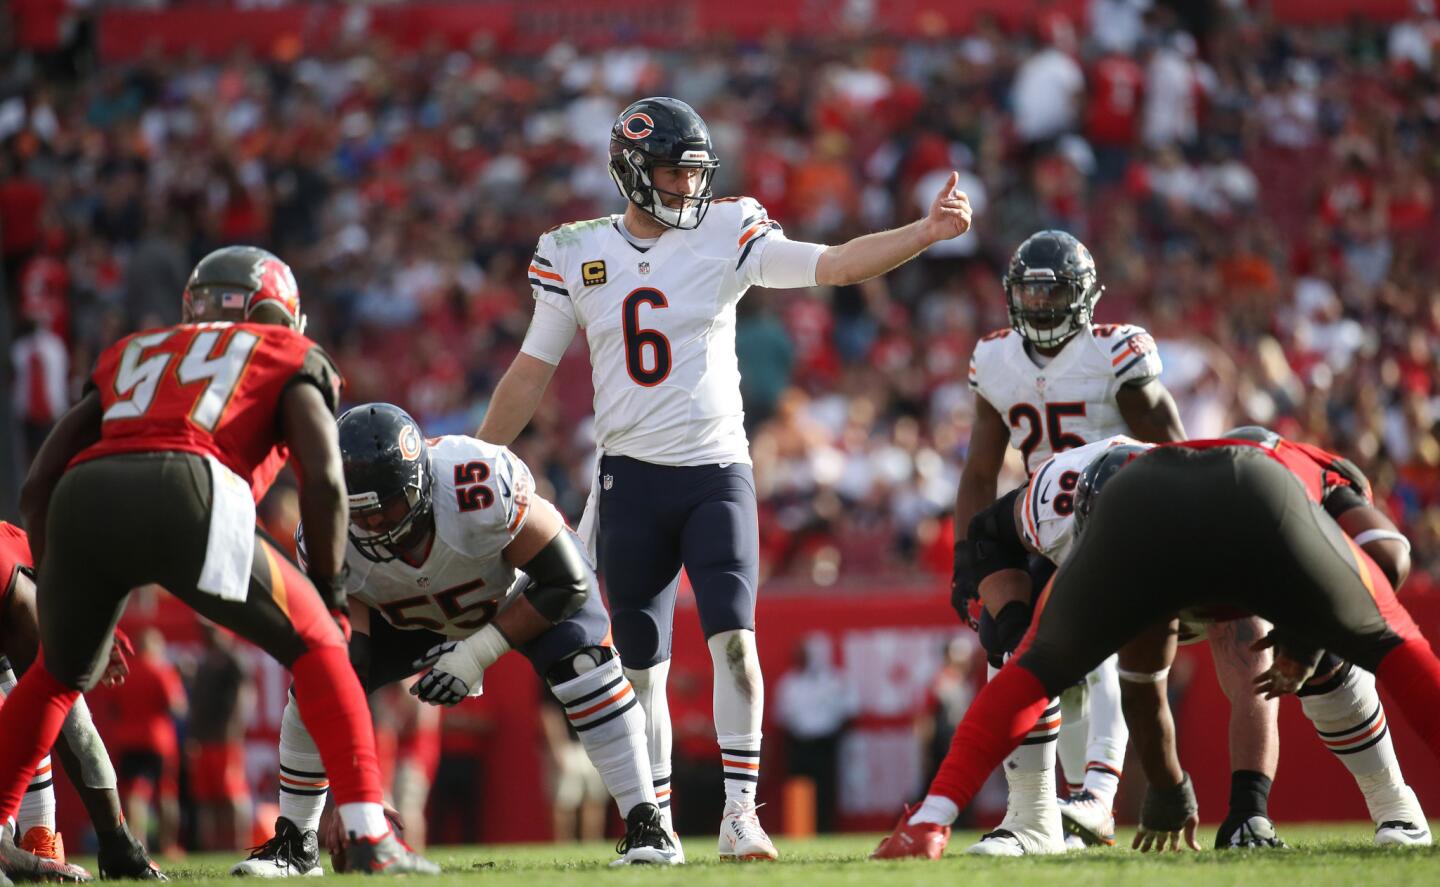 Bears quarterback Jay Cutler runs the offense in the fourth quarter Sunday, Dec. 27, 2015 at Raymond James Stadium in Tampa. The Bears defeated the Bucs, 26-21.